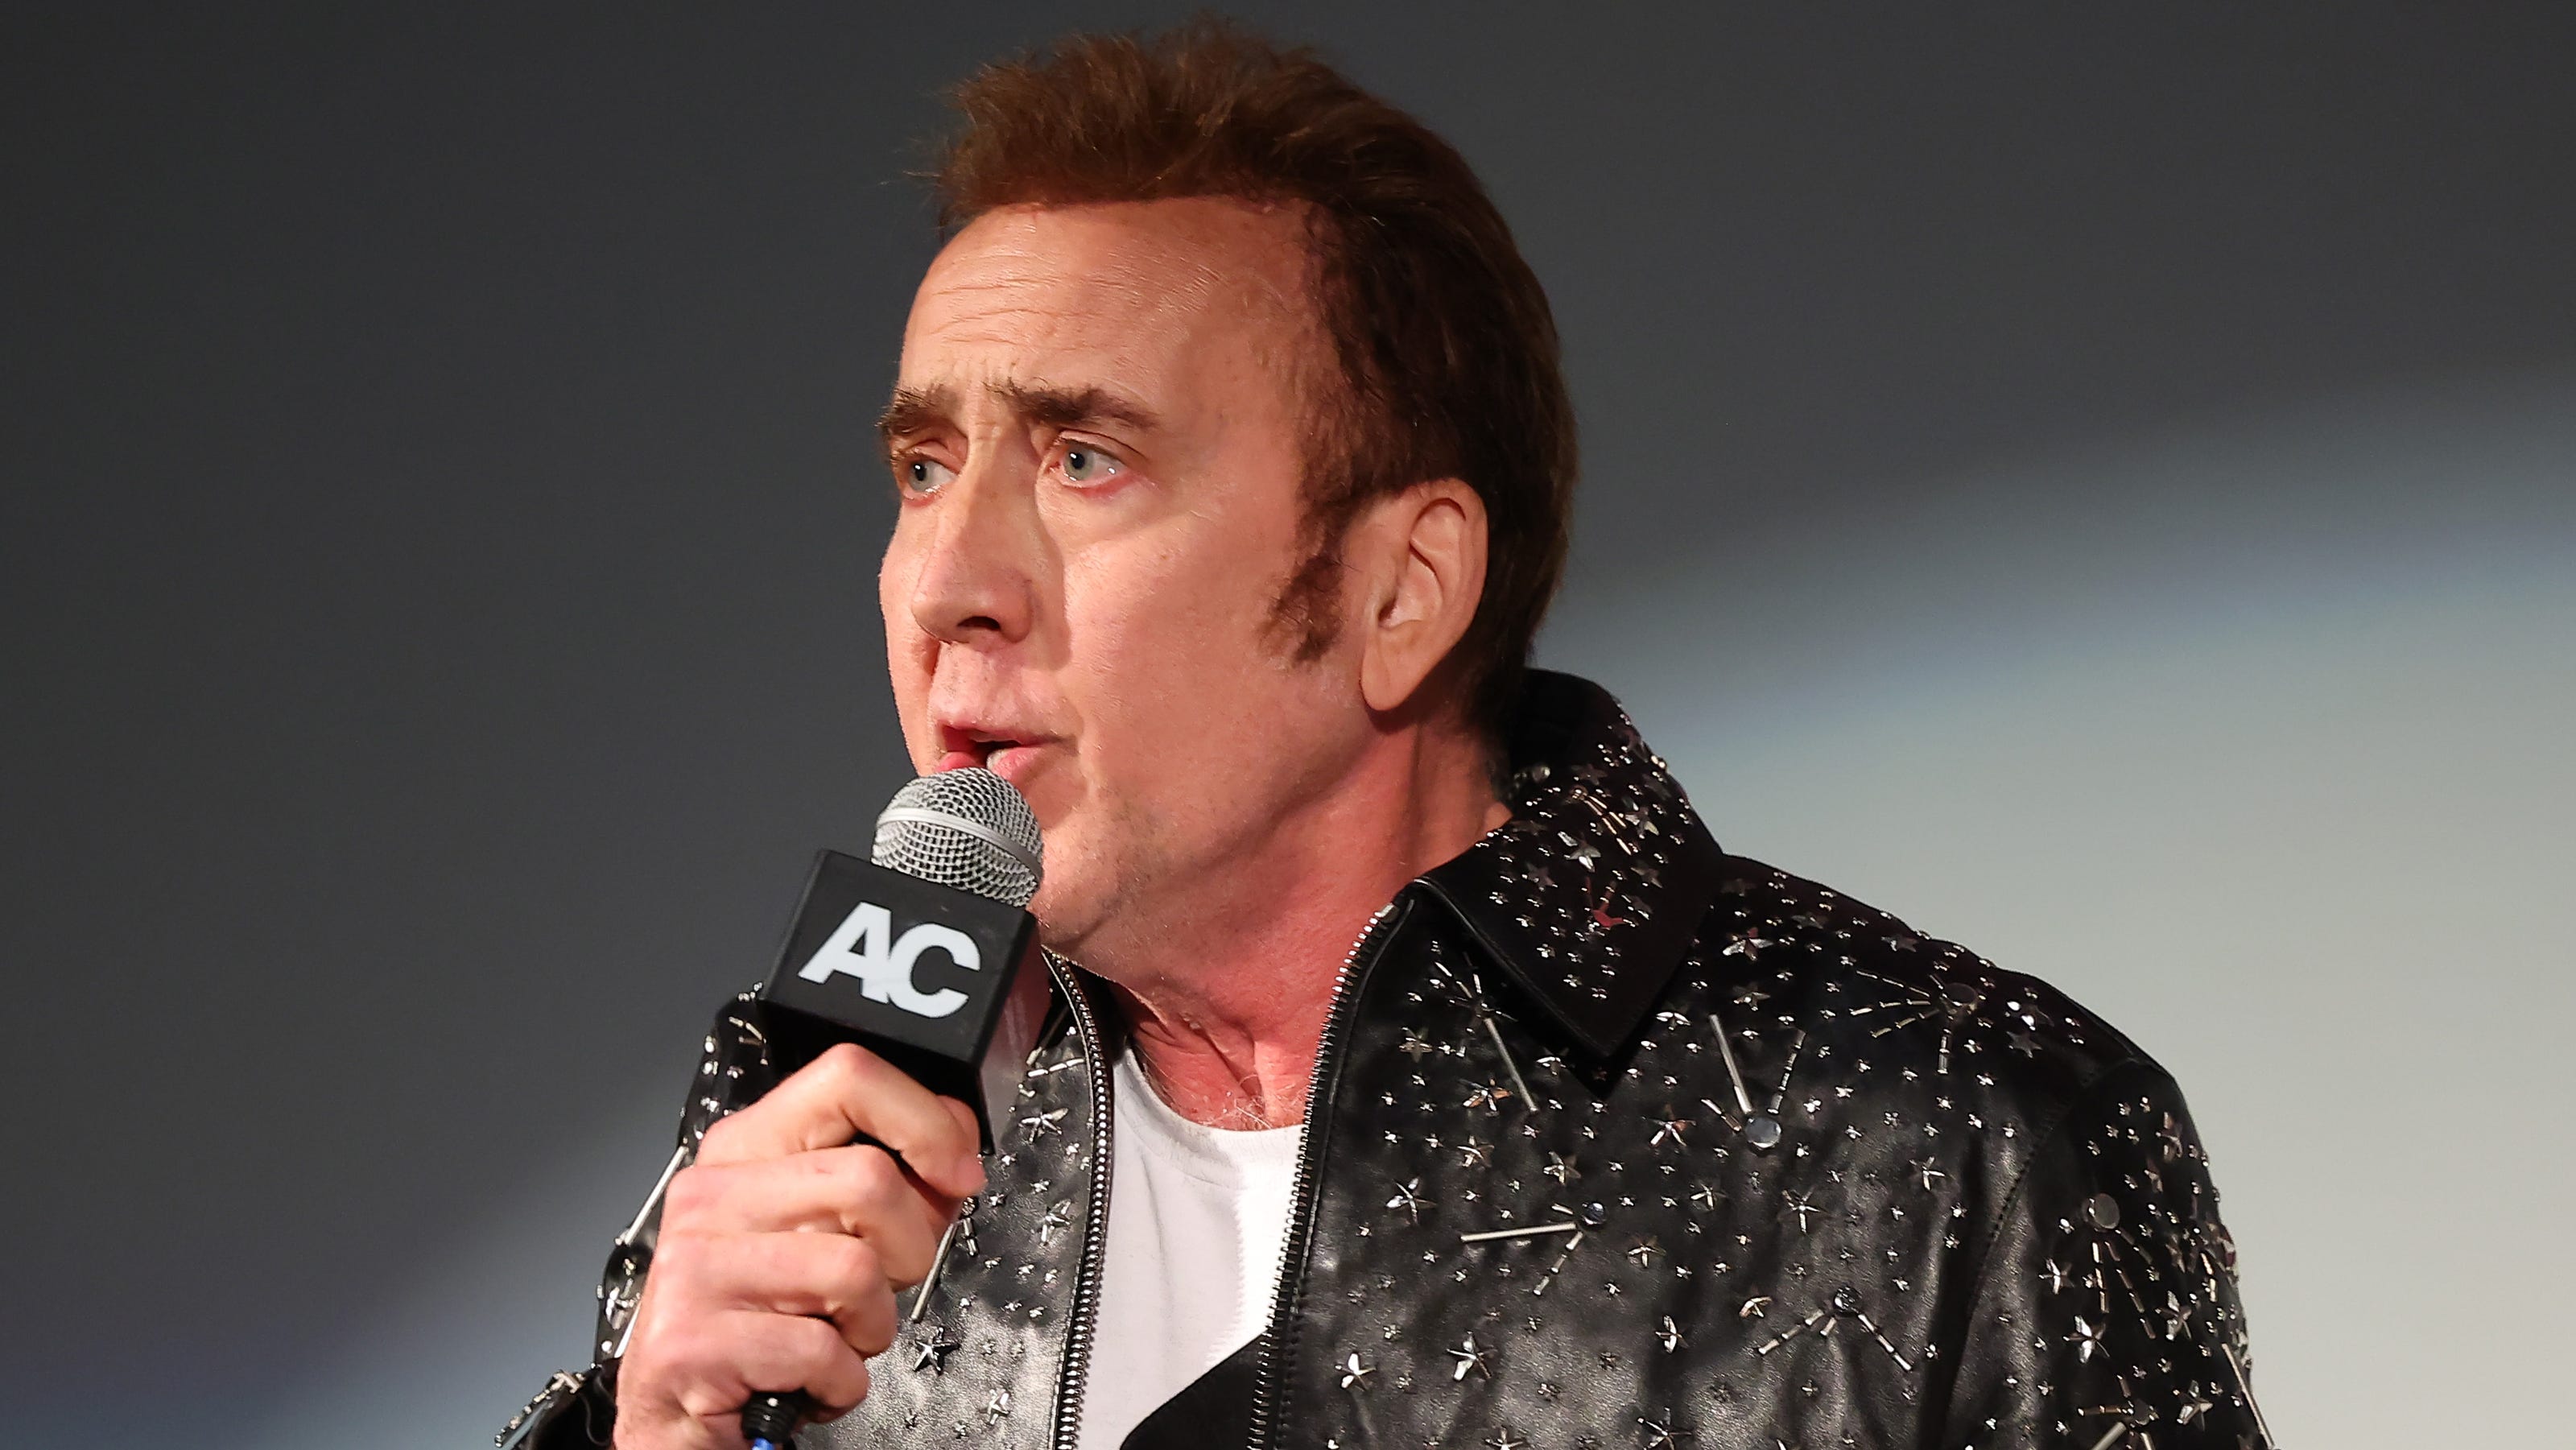 What to watch: Let's rage with Nic Cage